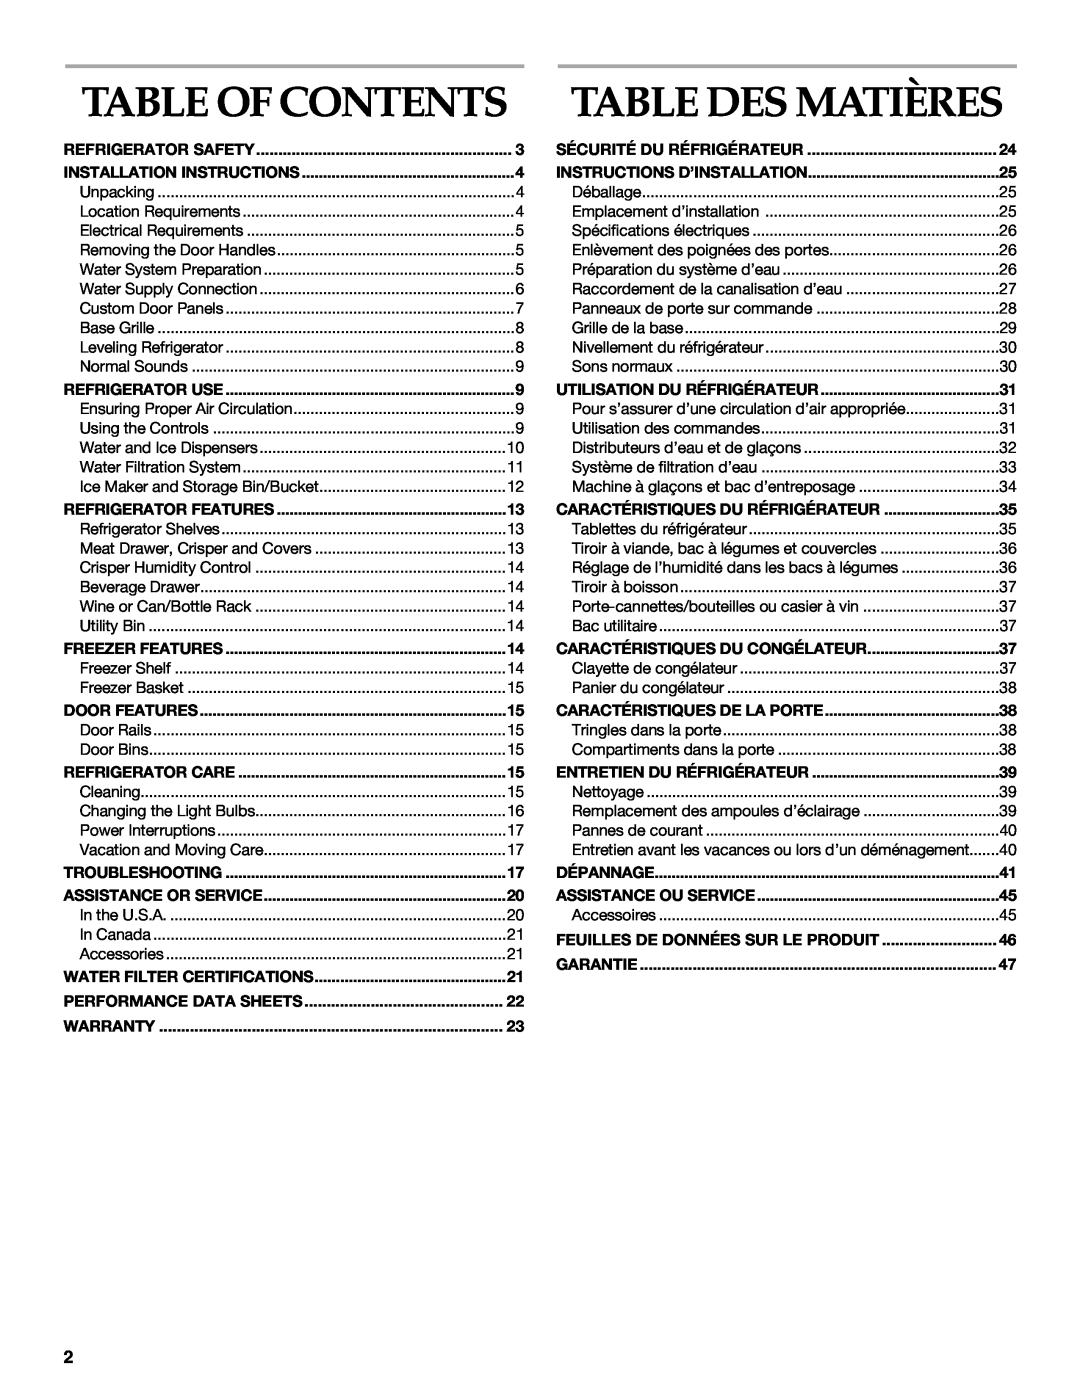 Whirlpool WF-NL300 Table Of Contents, Table Des Matières, Refrigerator Safety, Installation Instructions, Refrigerator Use 